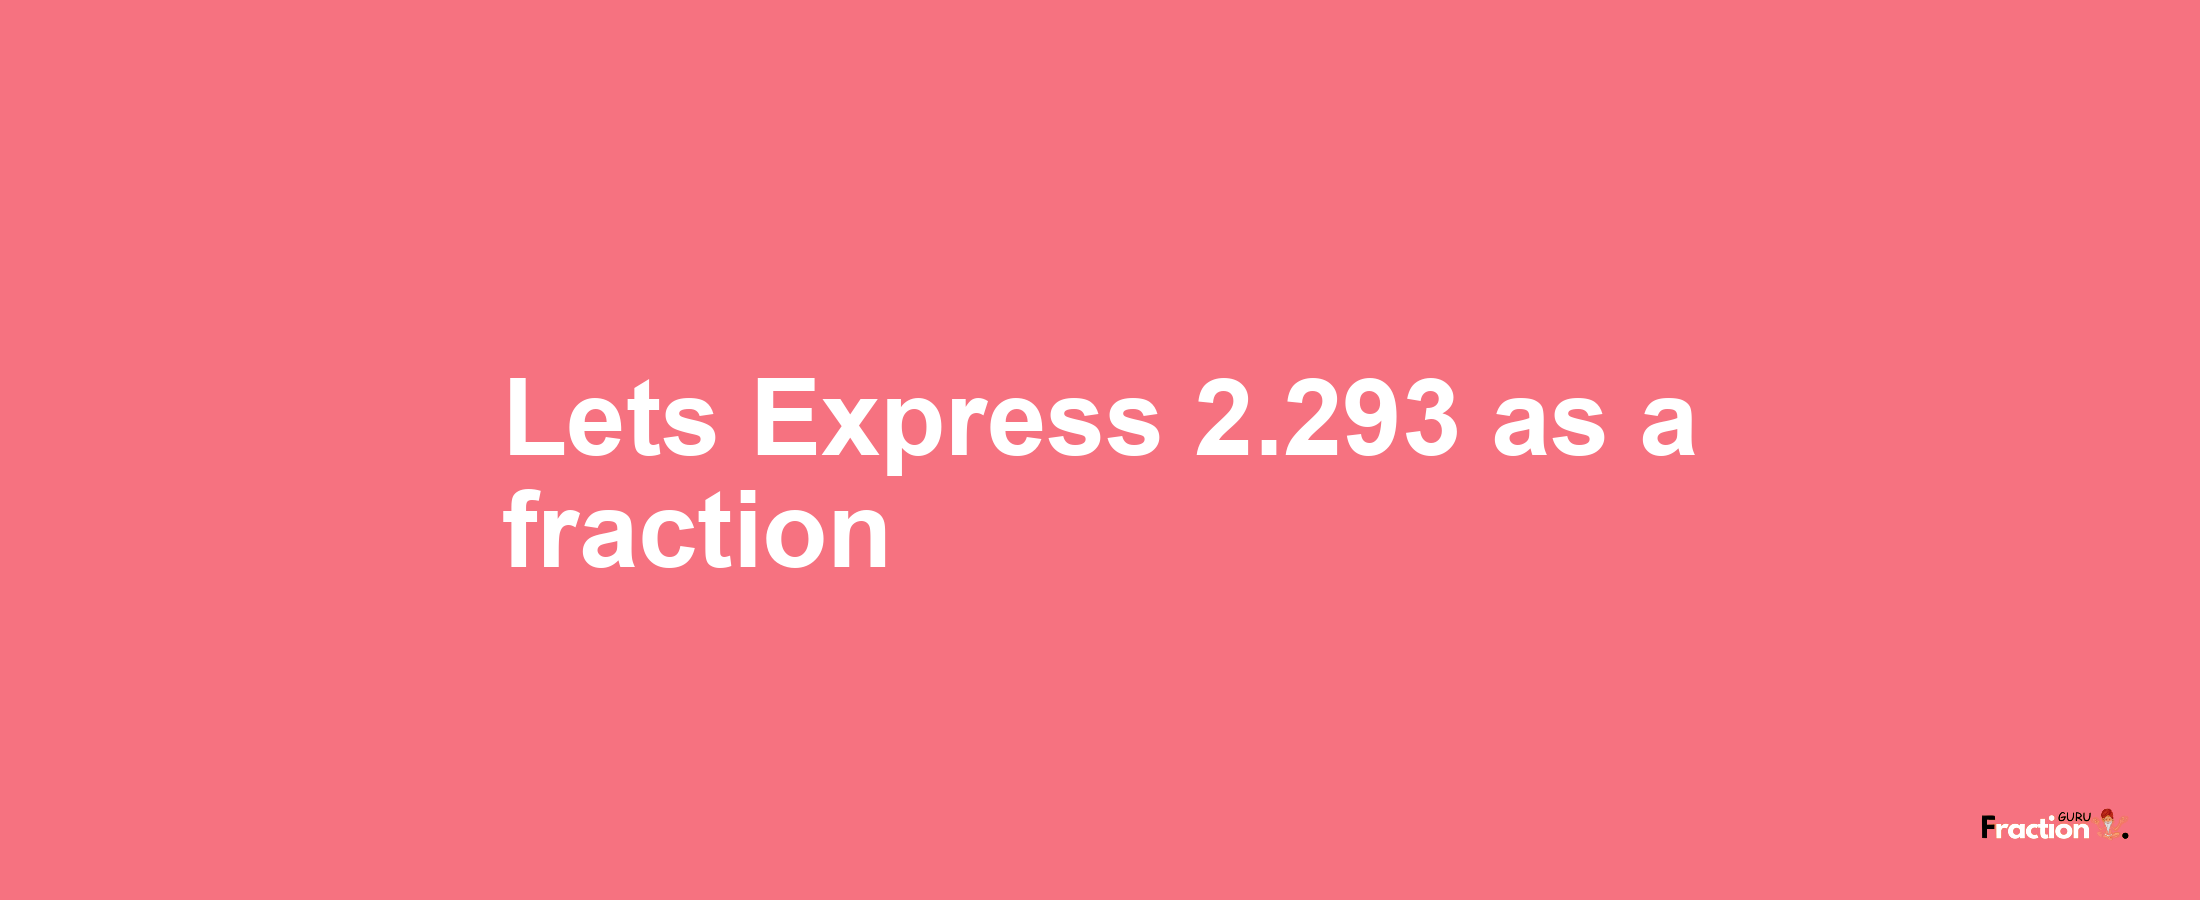 Lets Express 2.293 as afraction